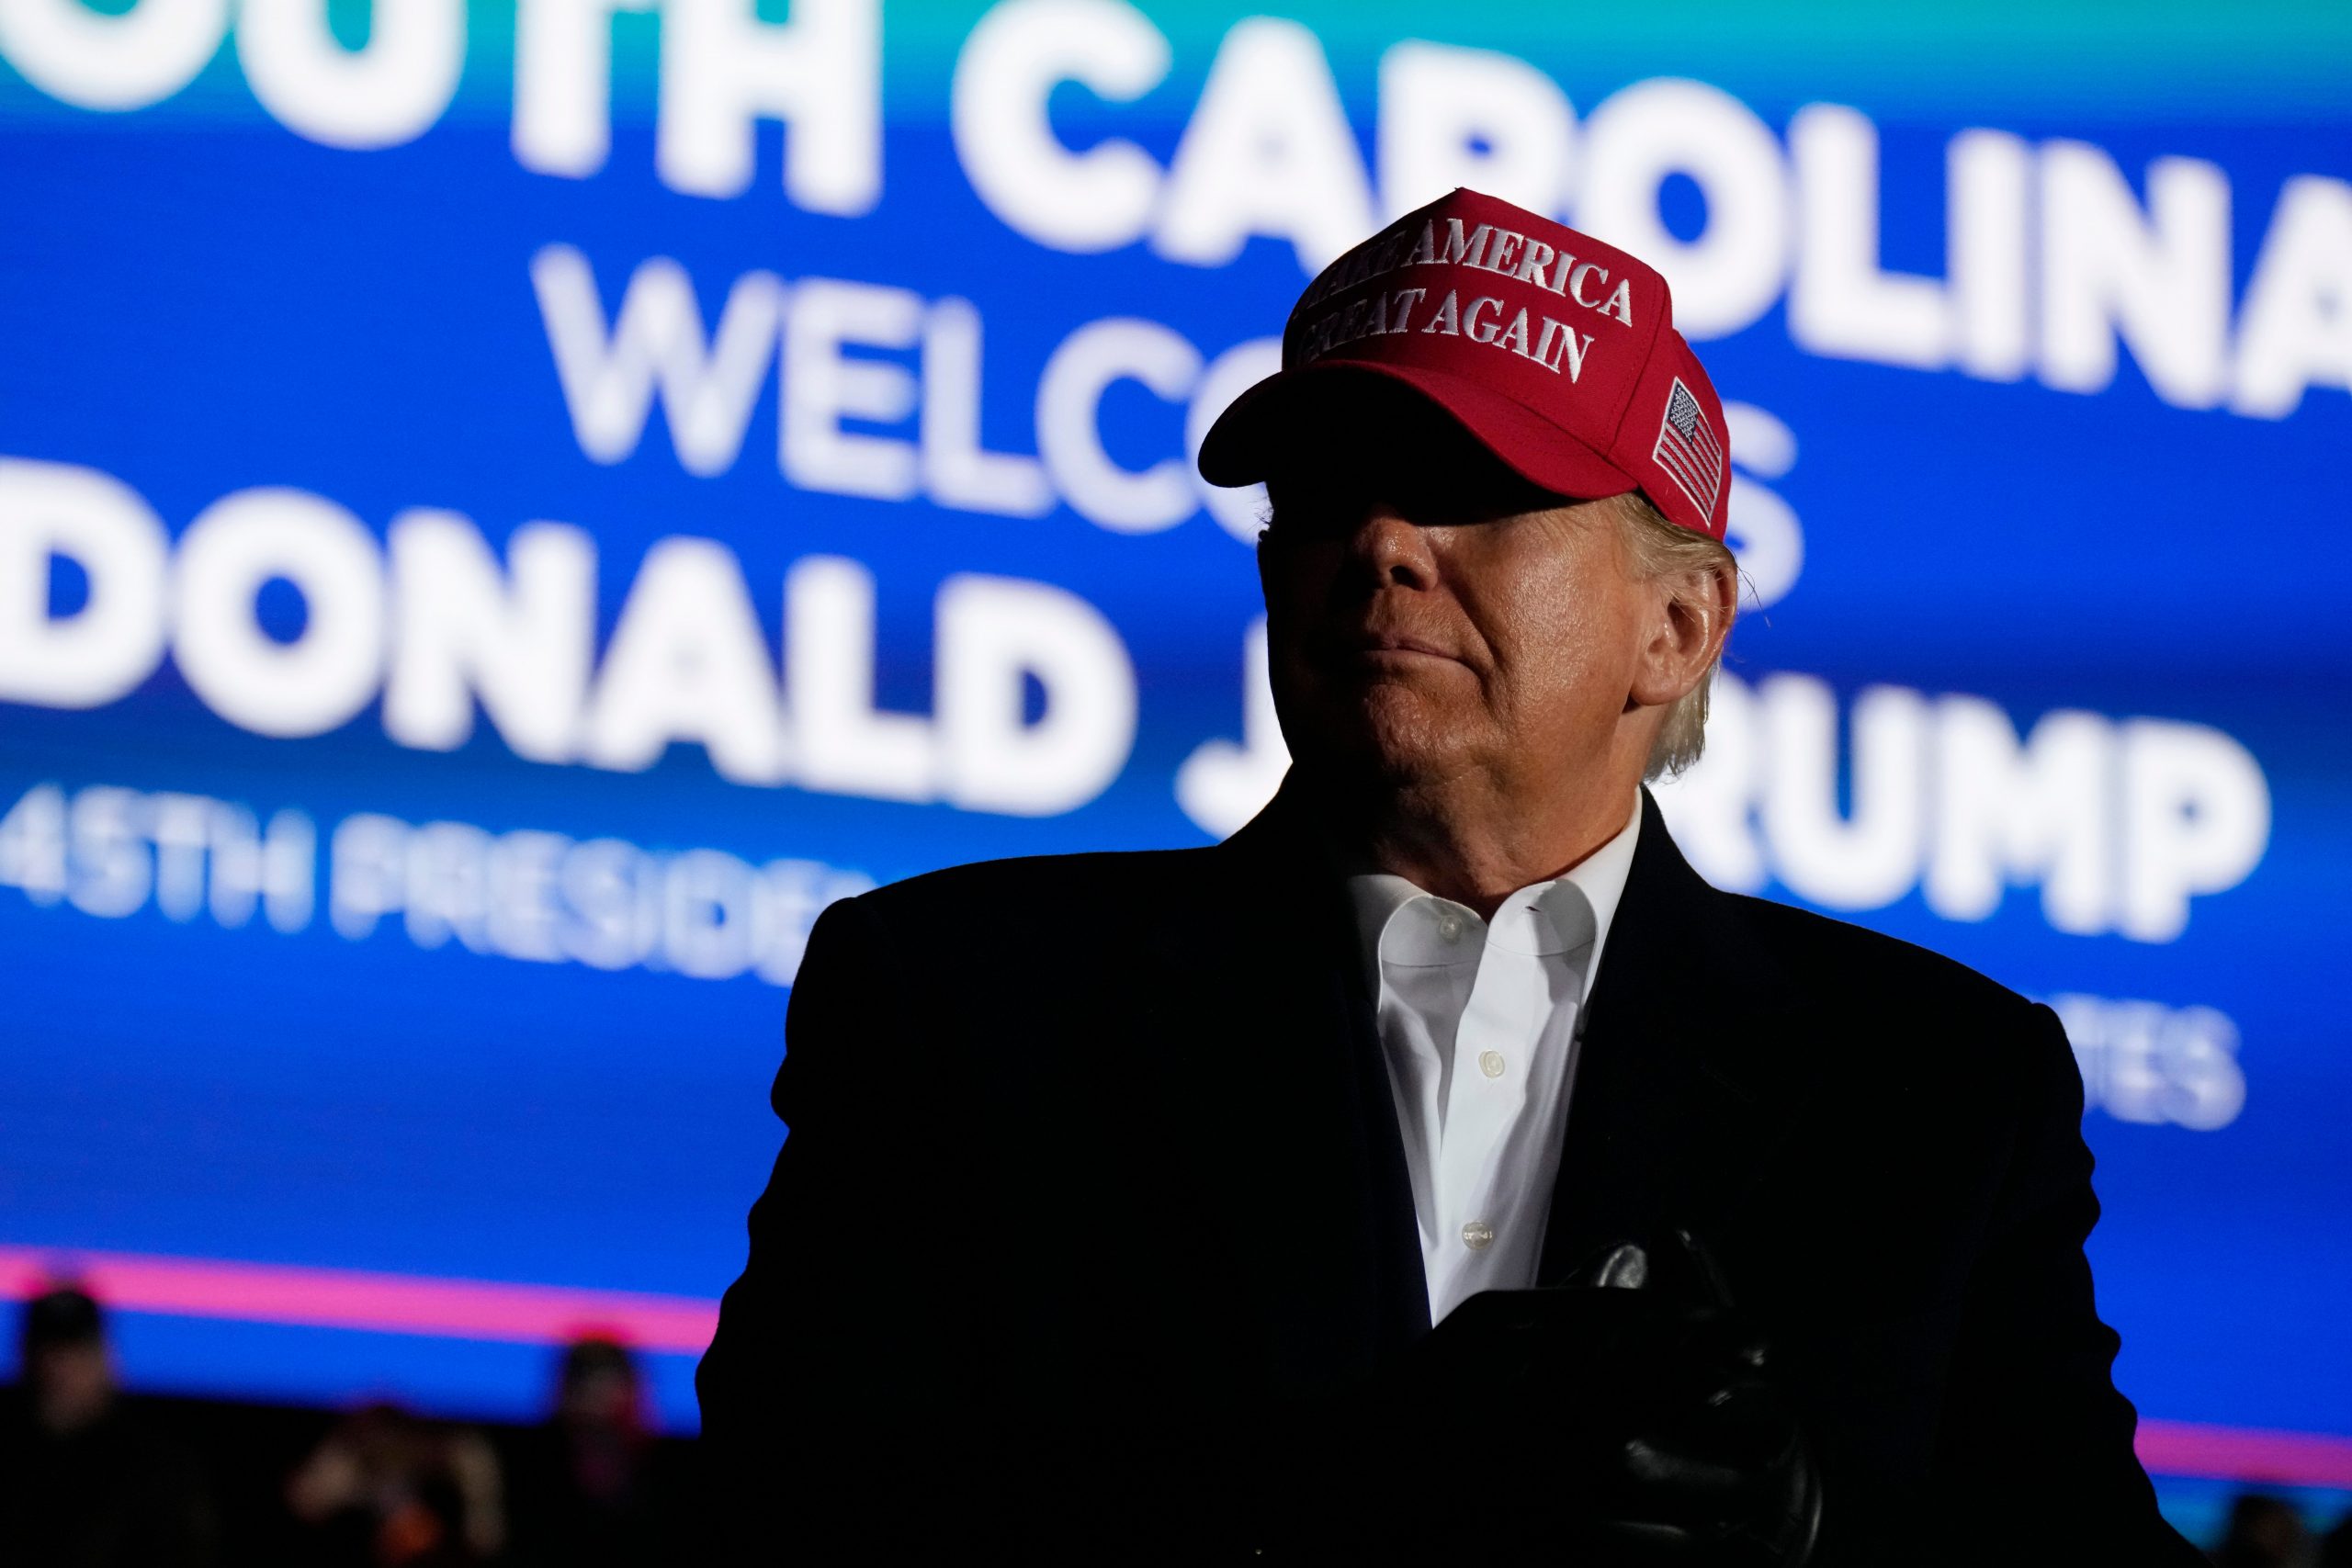 Crossing Trump: 2 South Carolina Republicans take different approaches